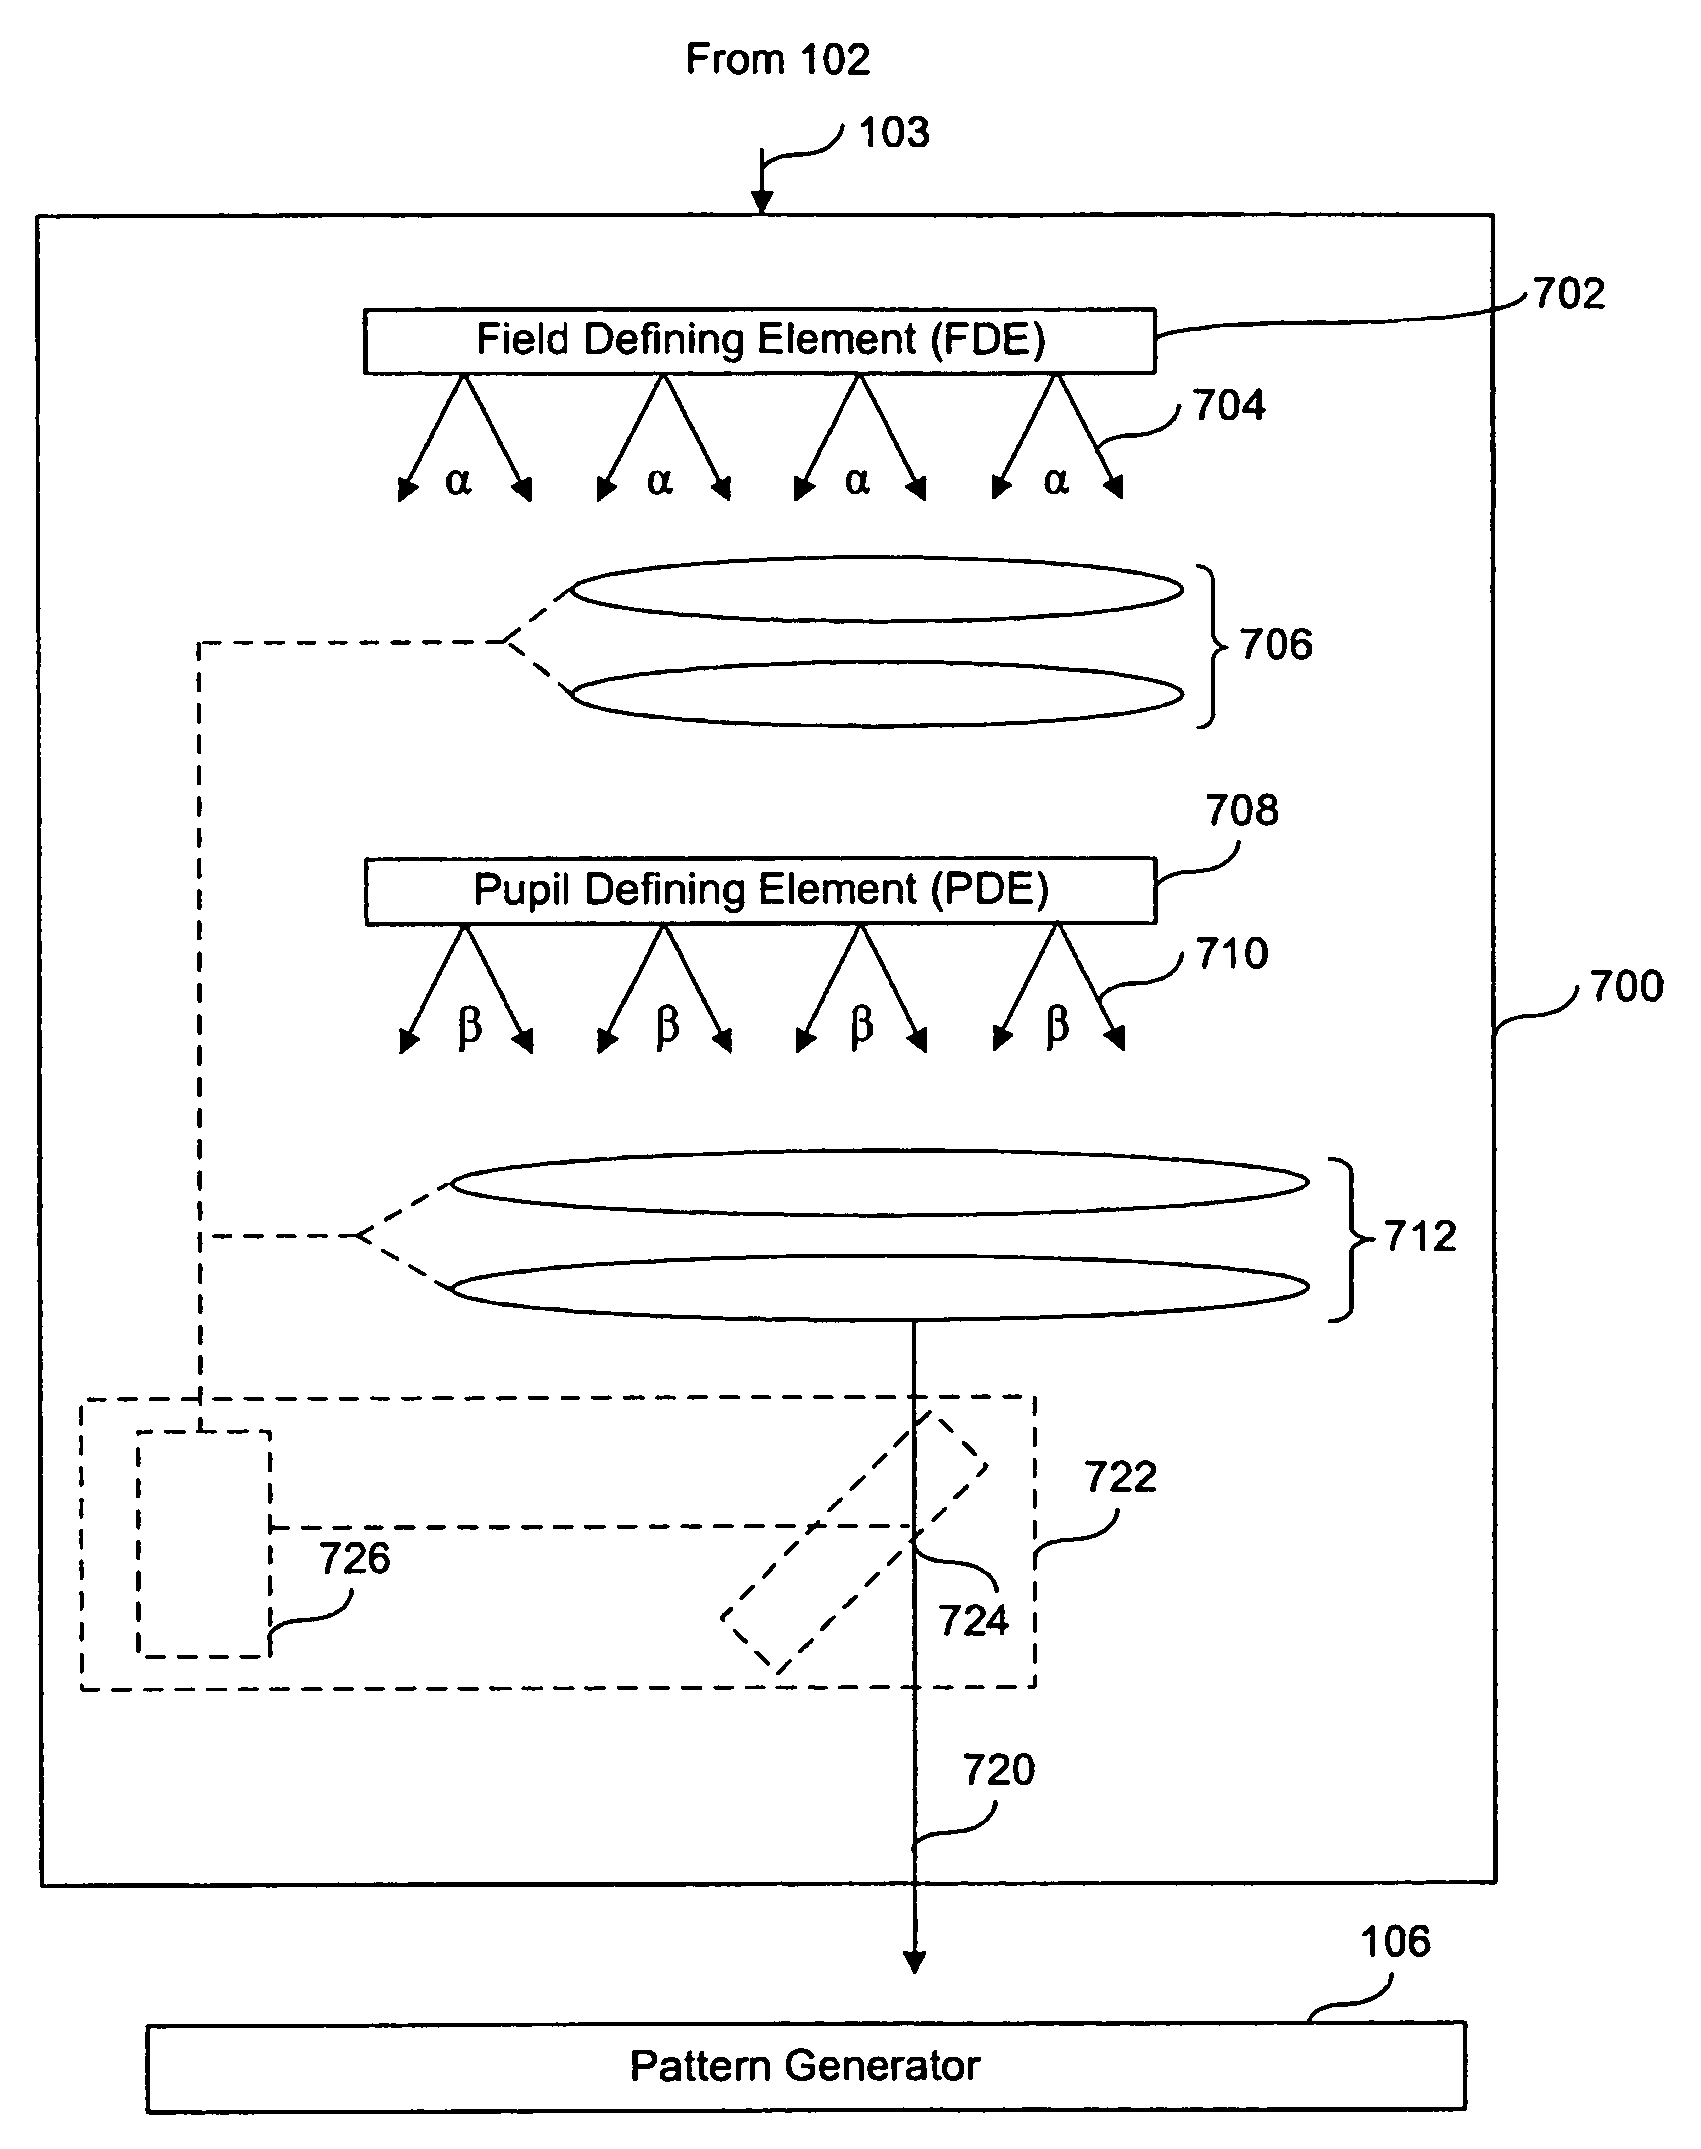 Illumination system and method allowing for varying of both field height and pupil